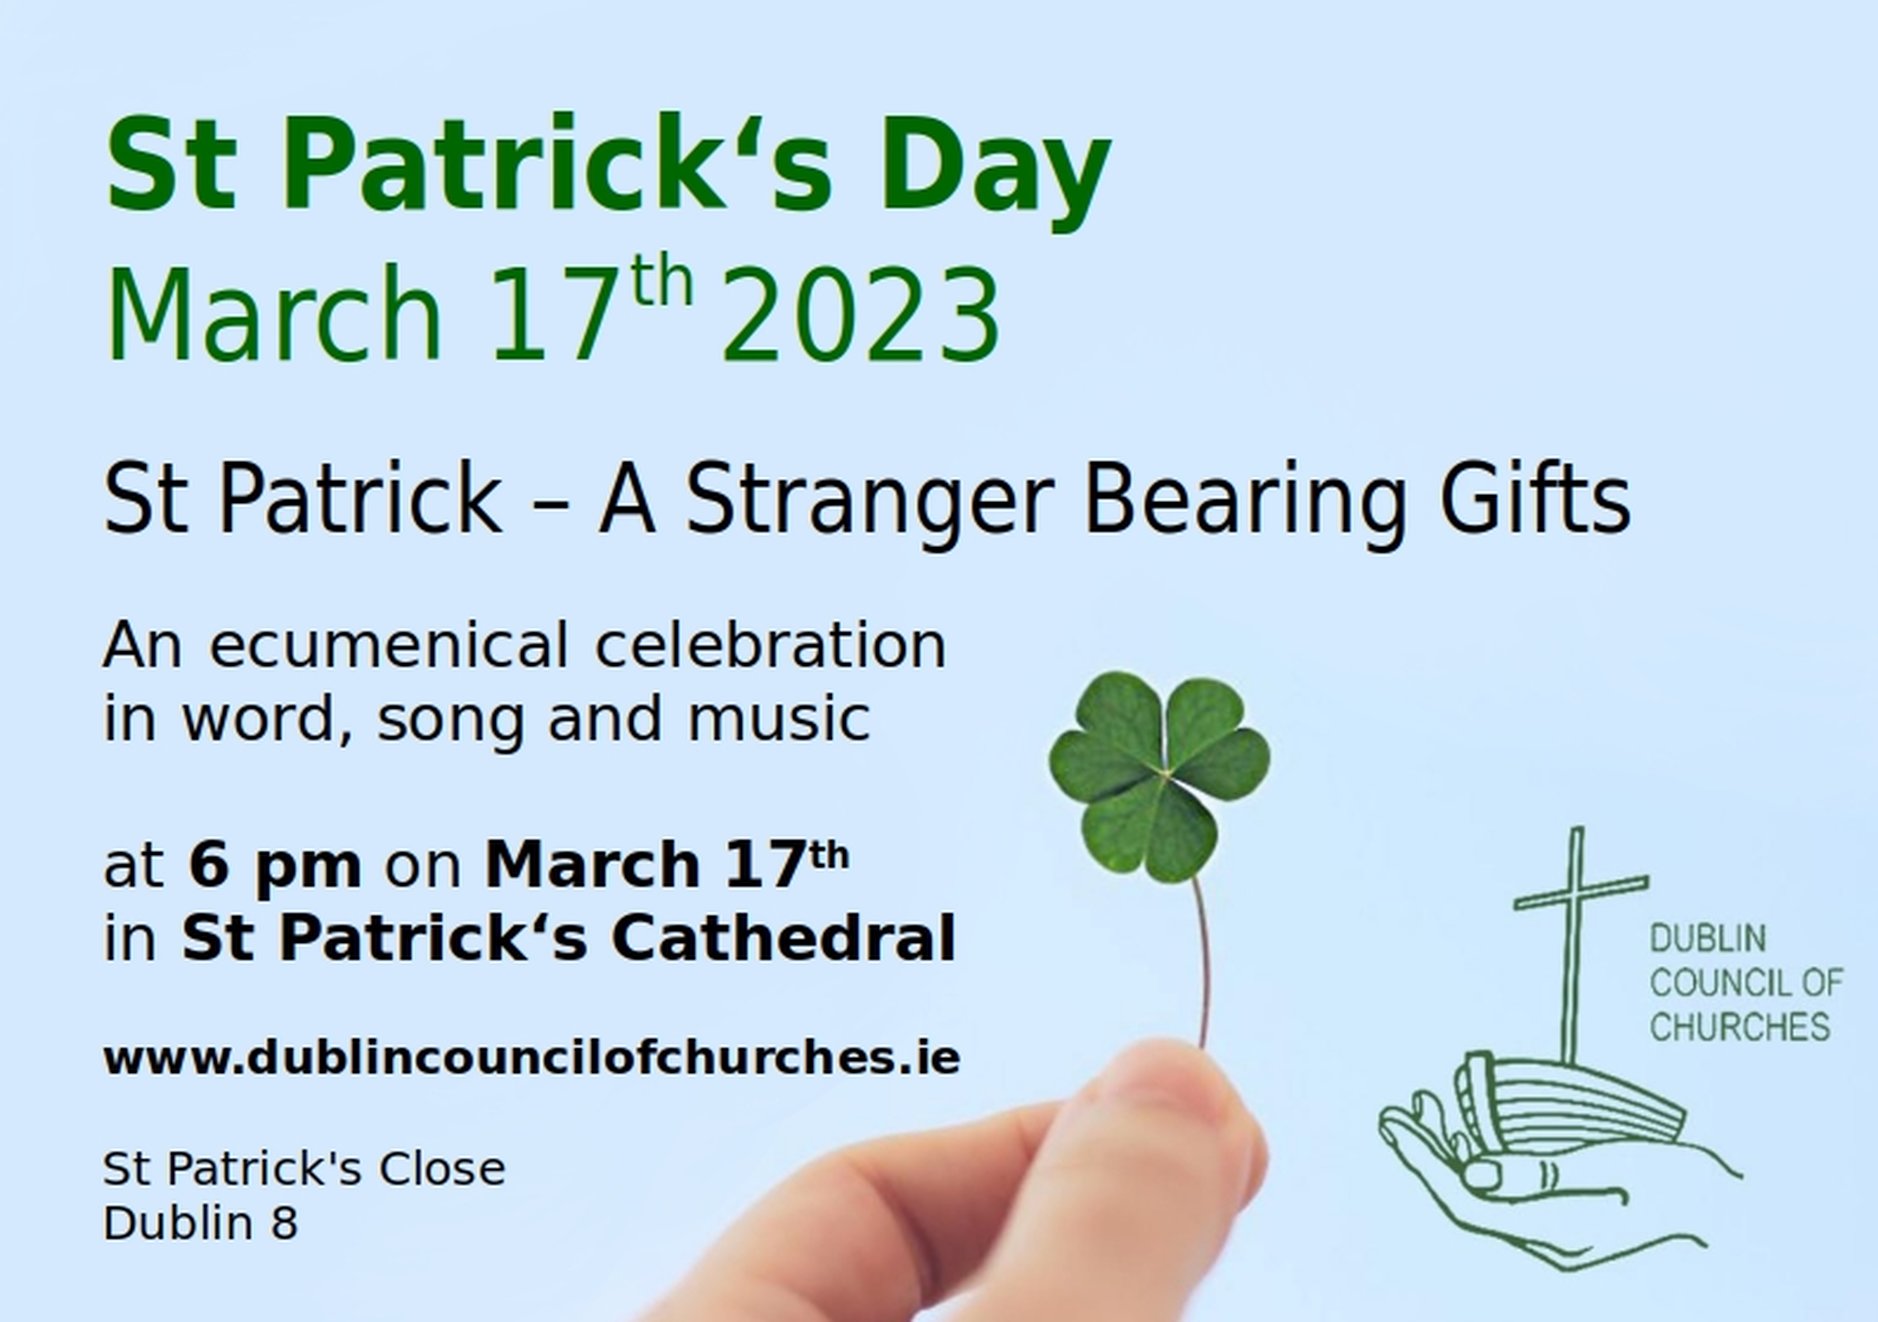 St Patrick’s Day Service to Bring a Message For Our Times